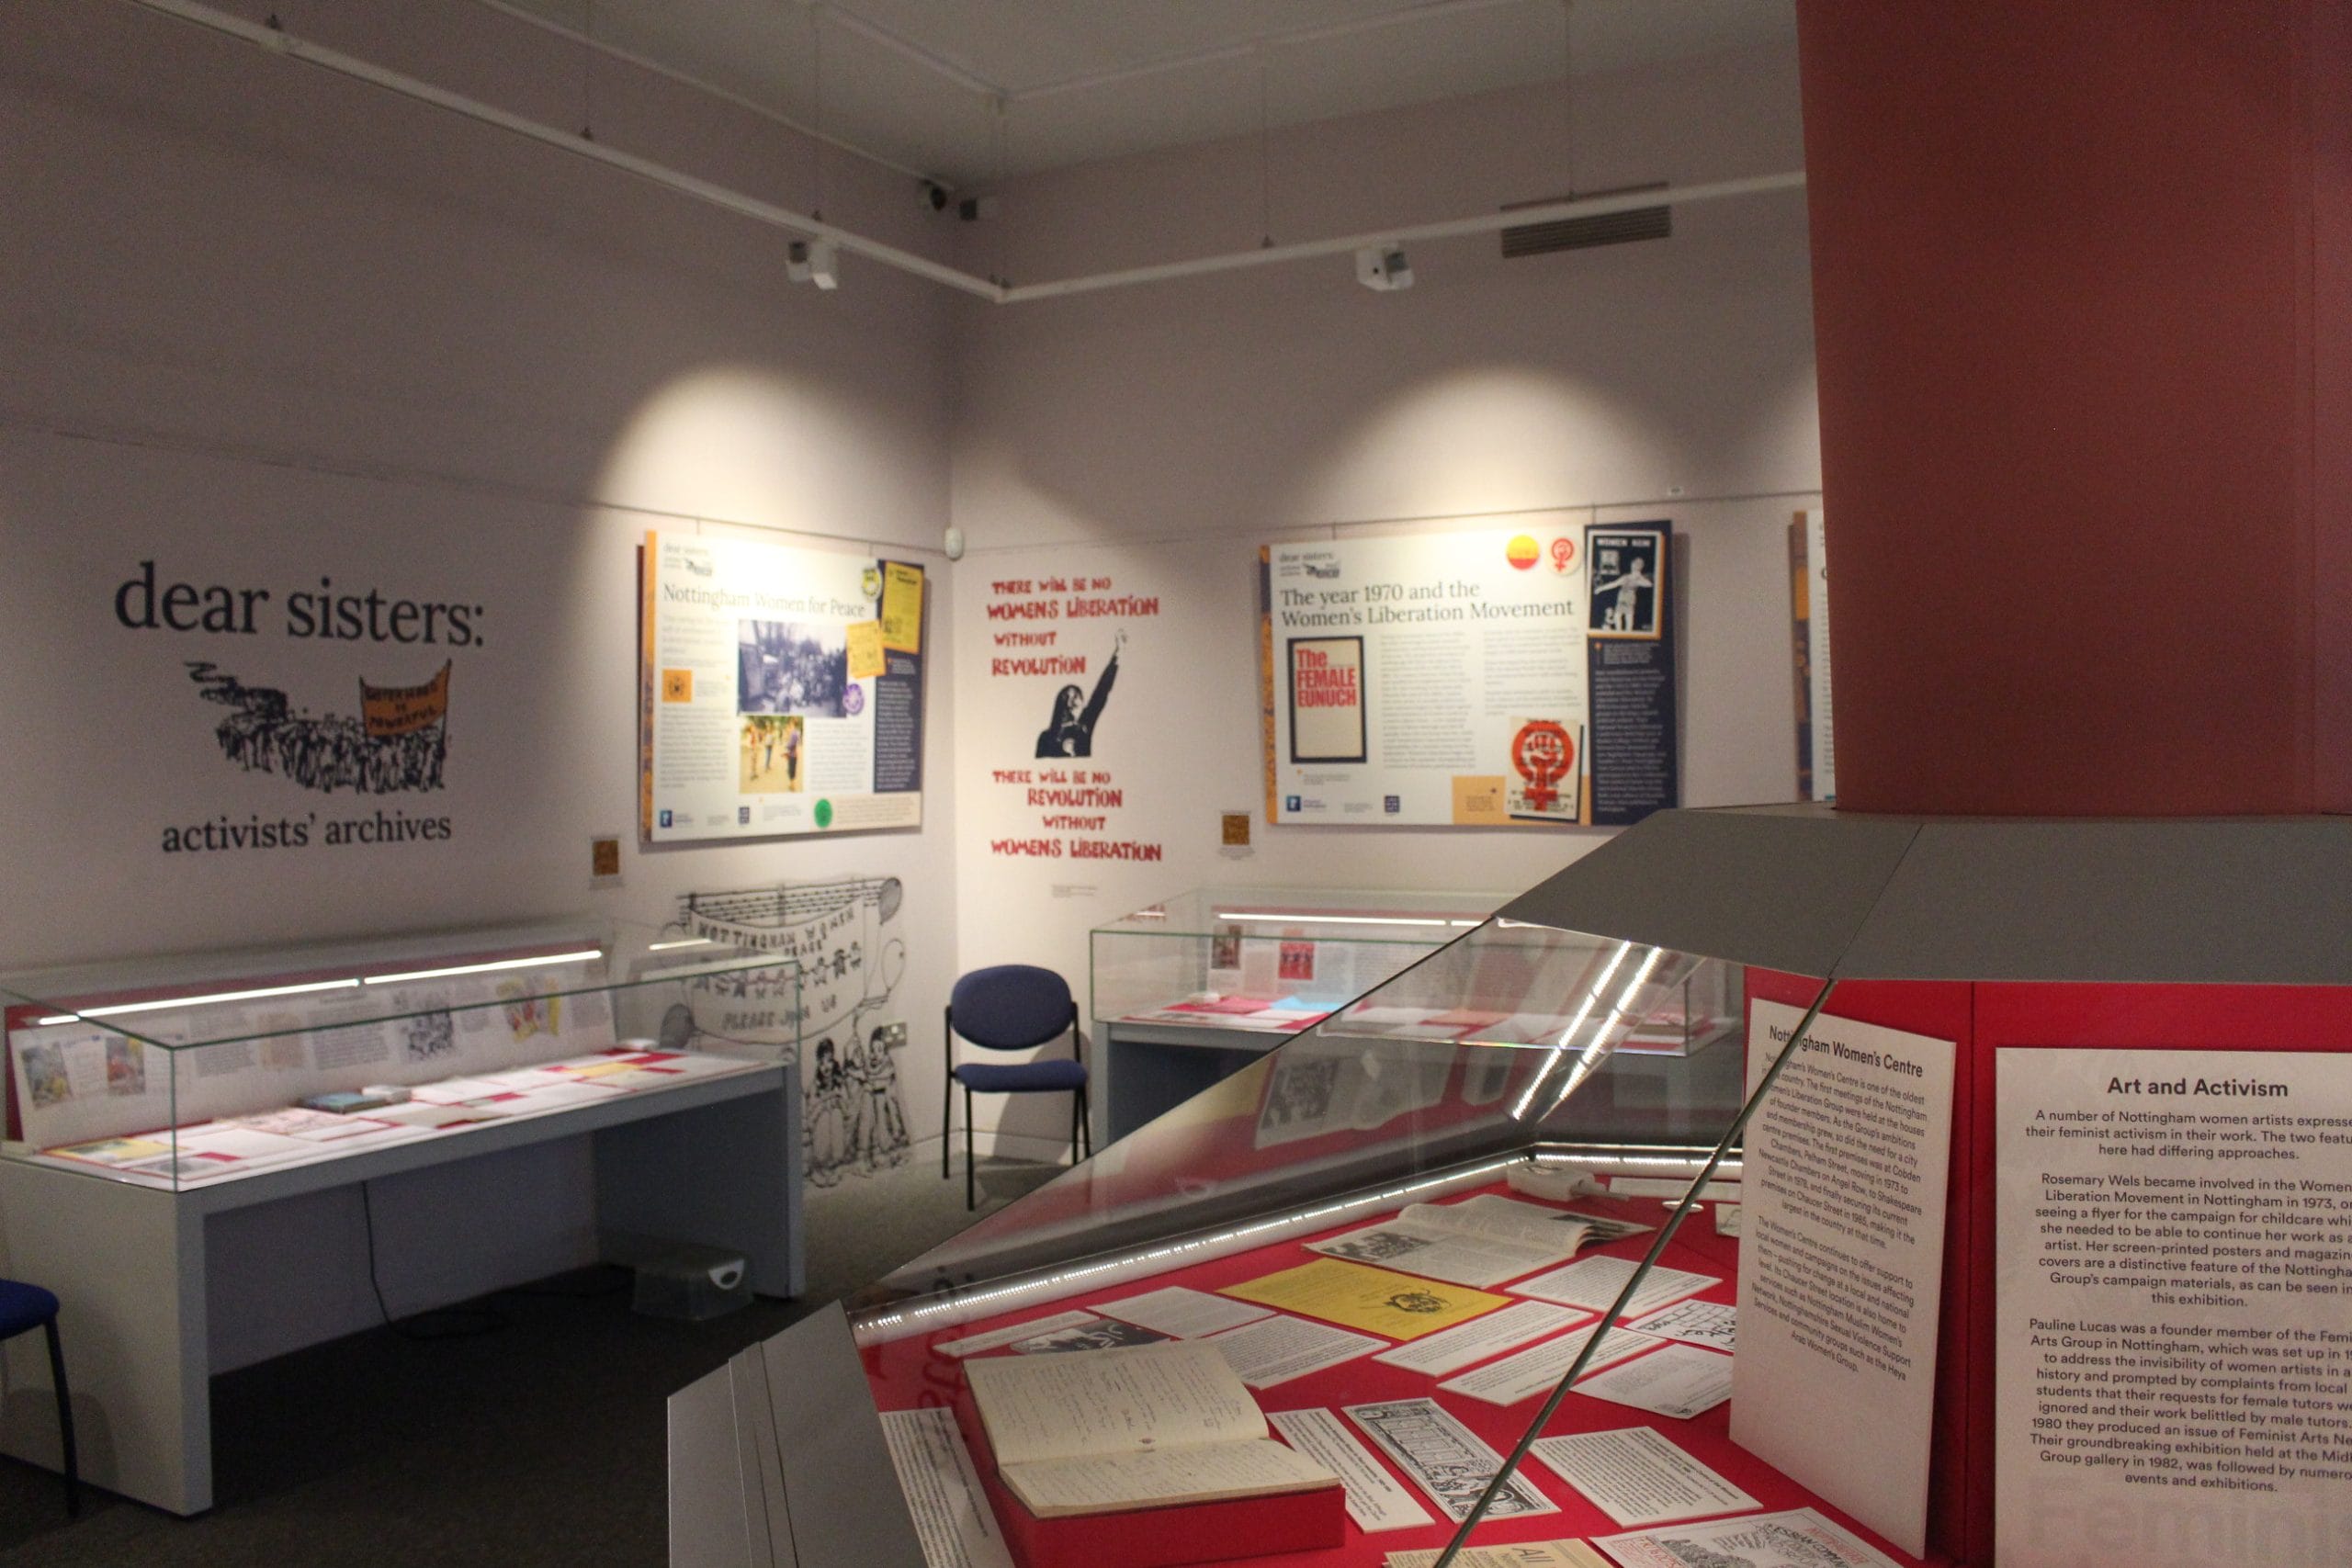 A photo of part of the Dear Sister exhibition with glass display cases and feminist slogans on the walls